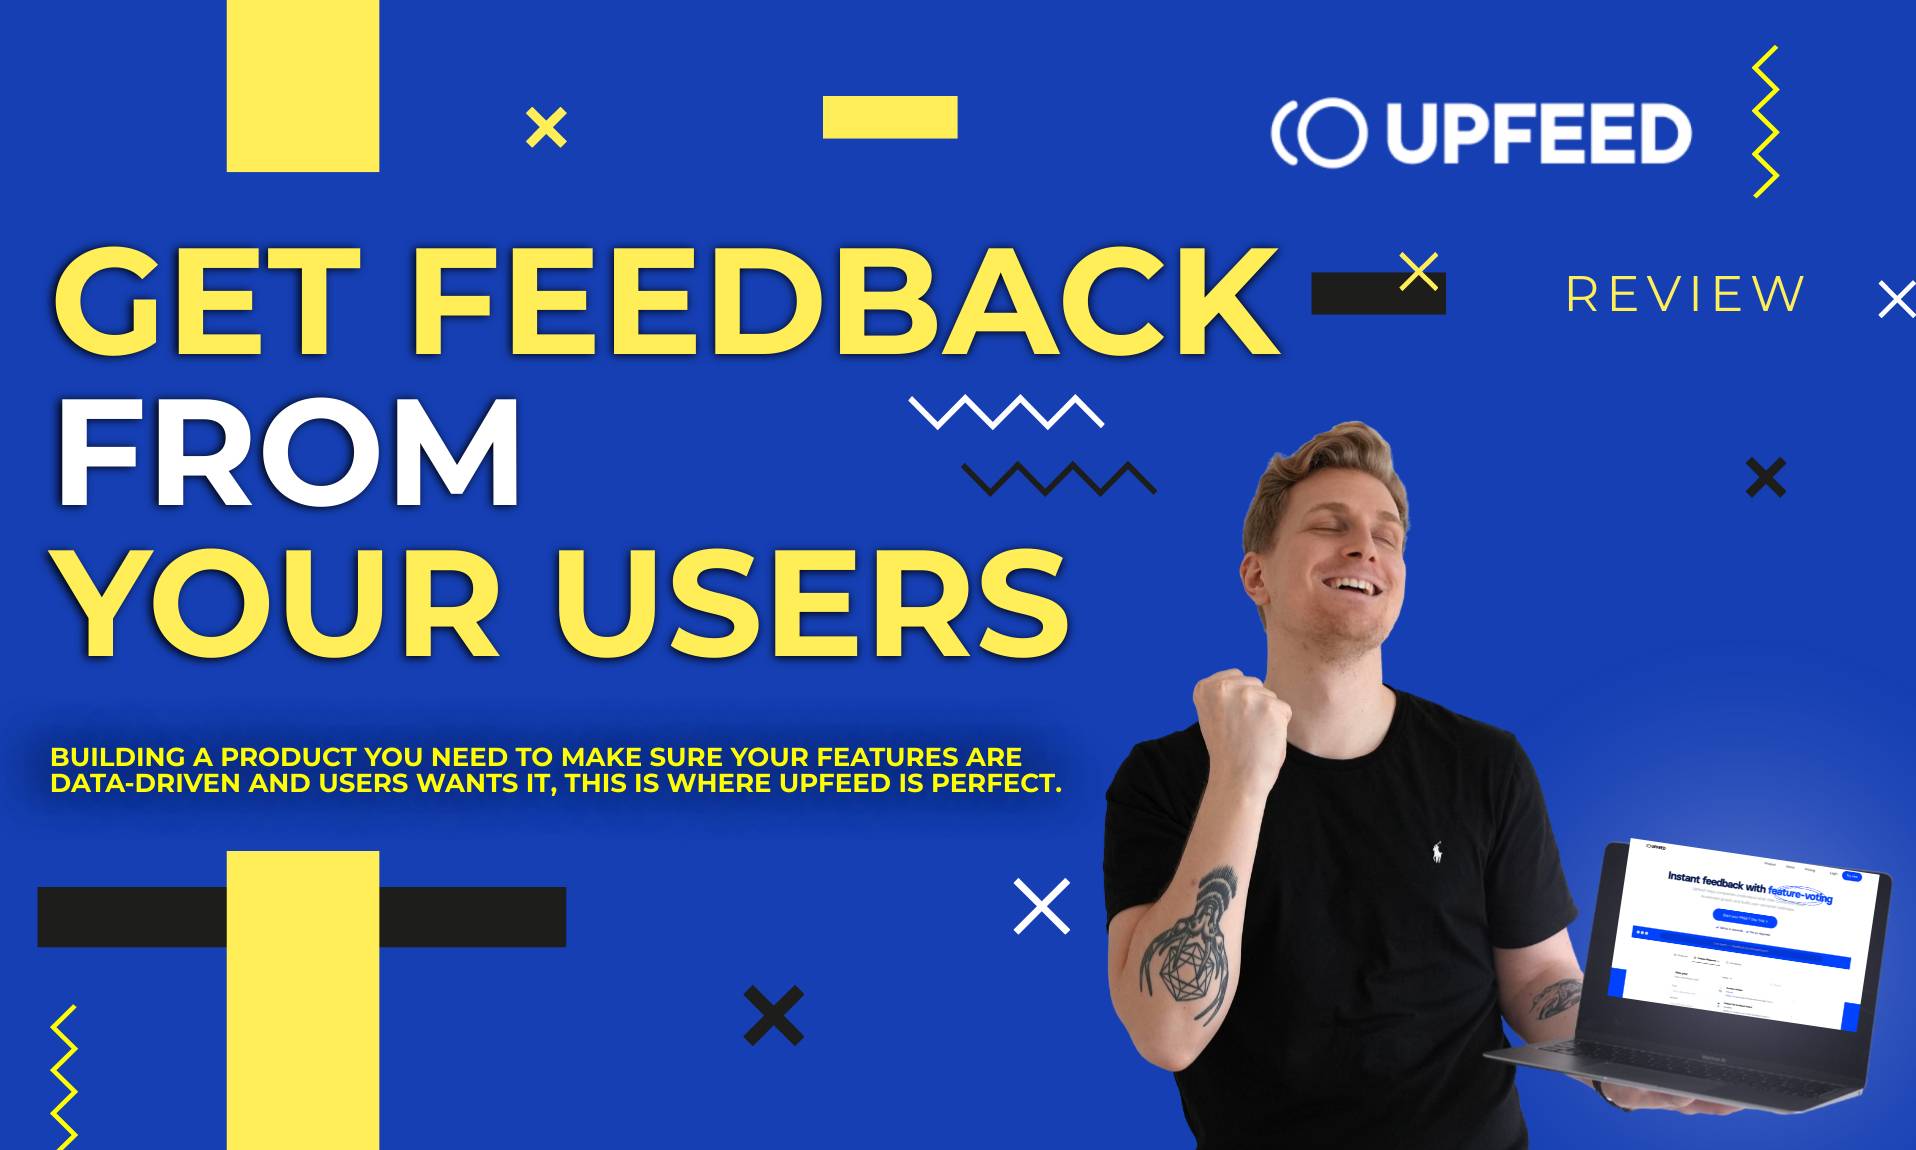 Upfeed review - Build a data-driven product